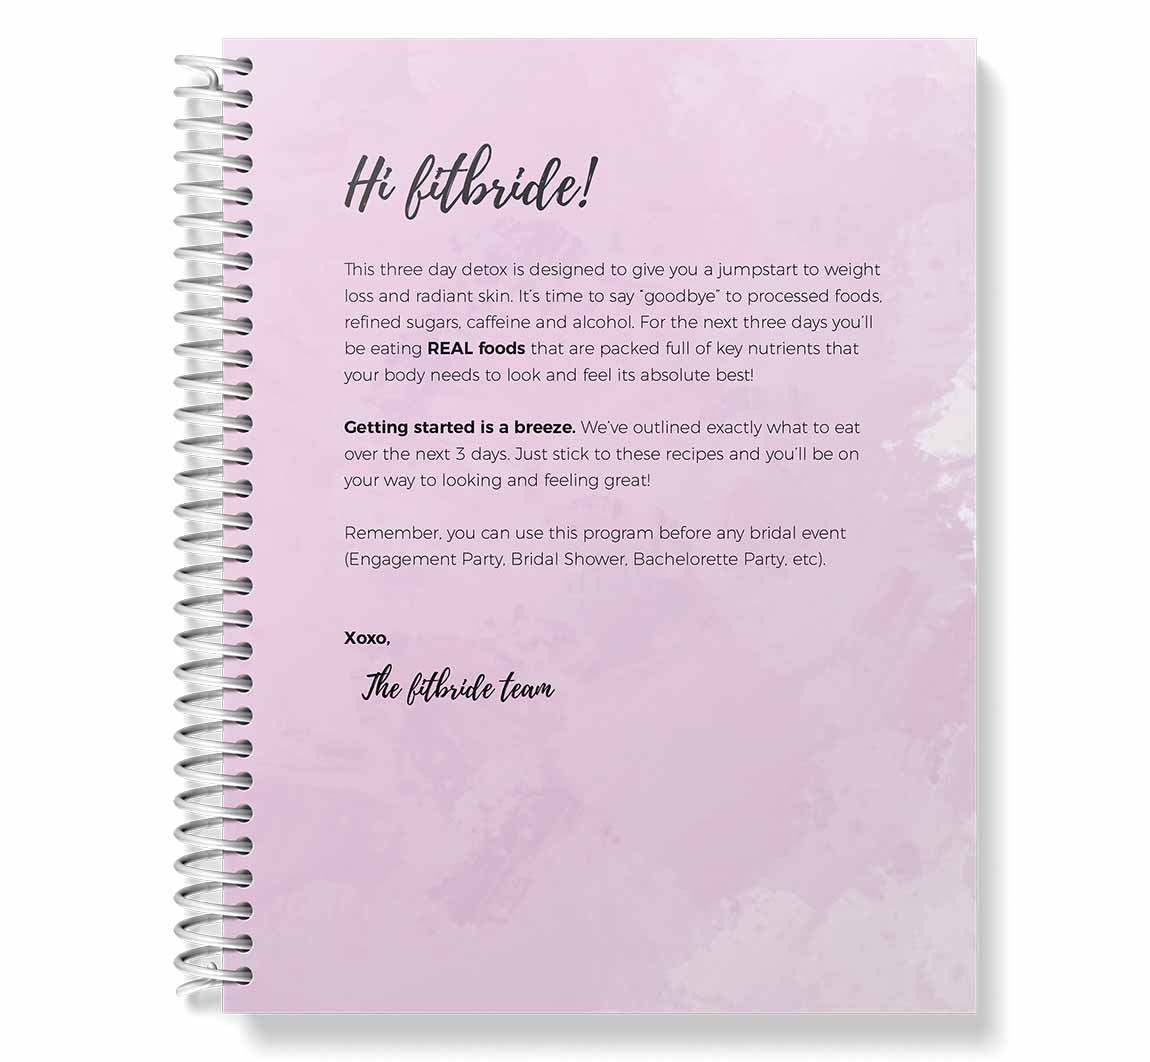 Welcome message to Fitbrides